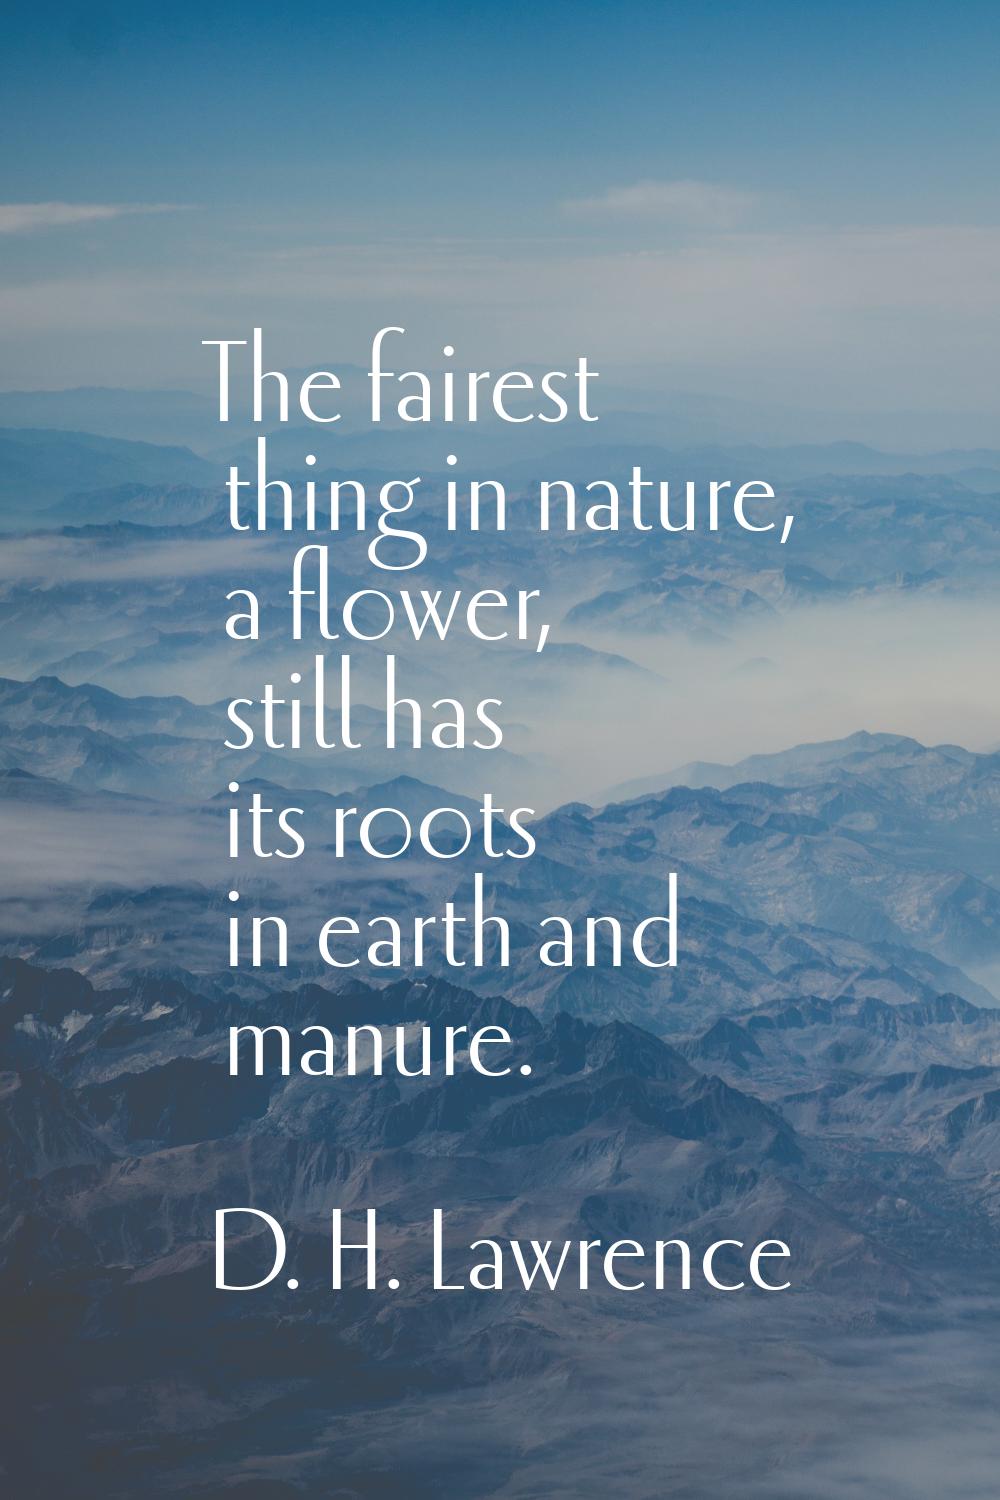 The fairest thing in nature, a flower, still has its roots in earth and manure.